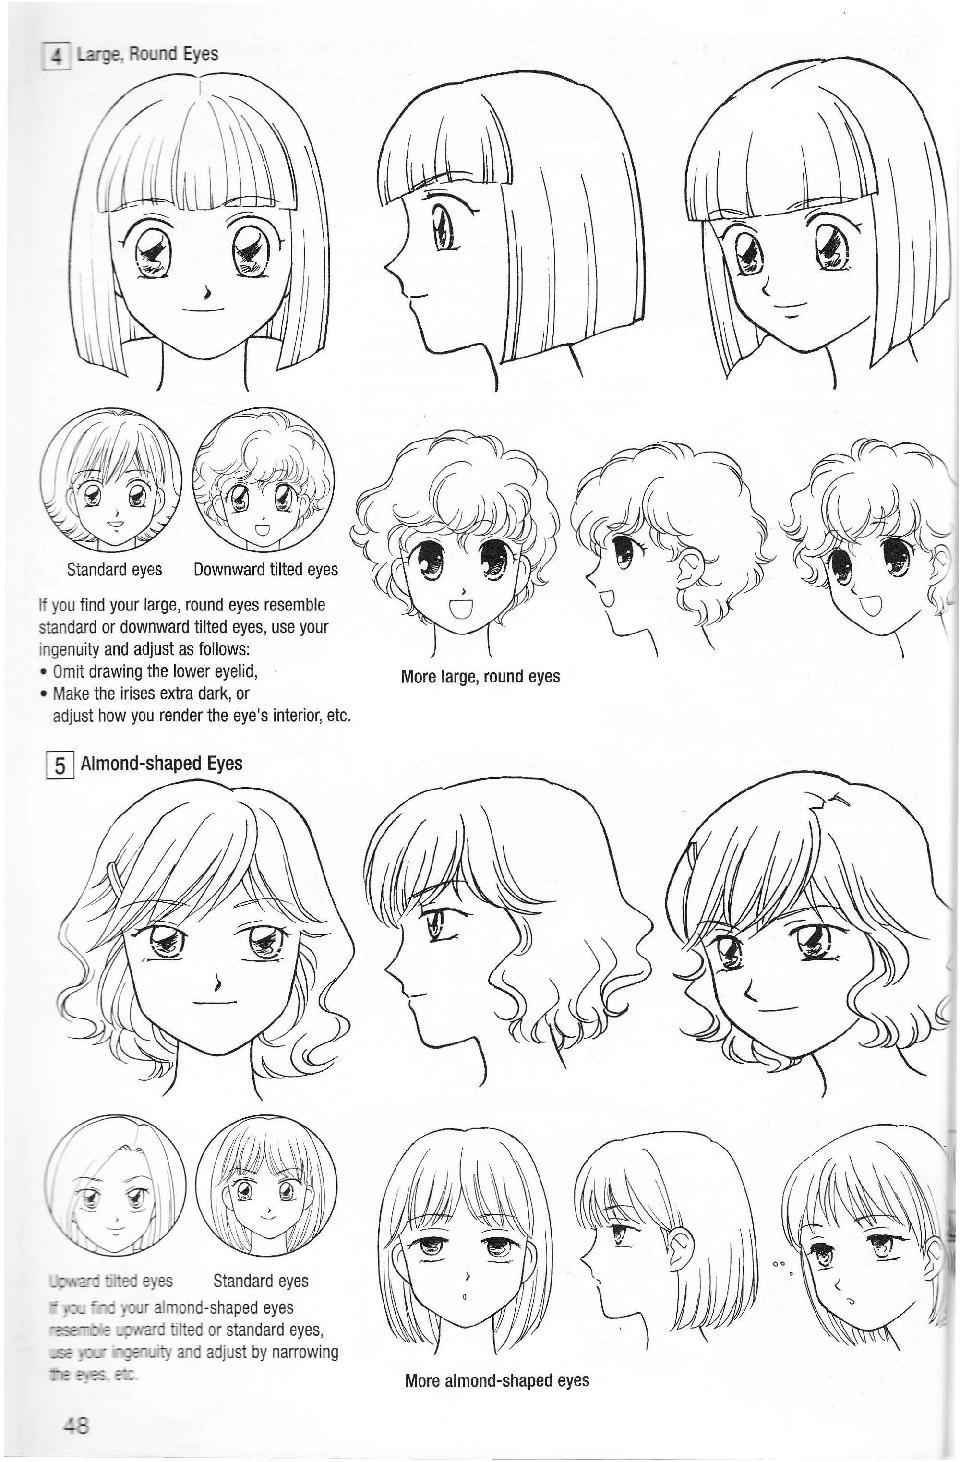 More How to Draw Manga Vol. 2 - Penning Characters 49